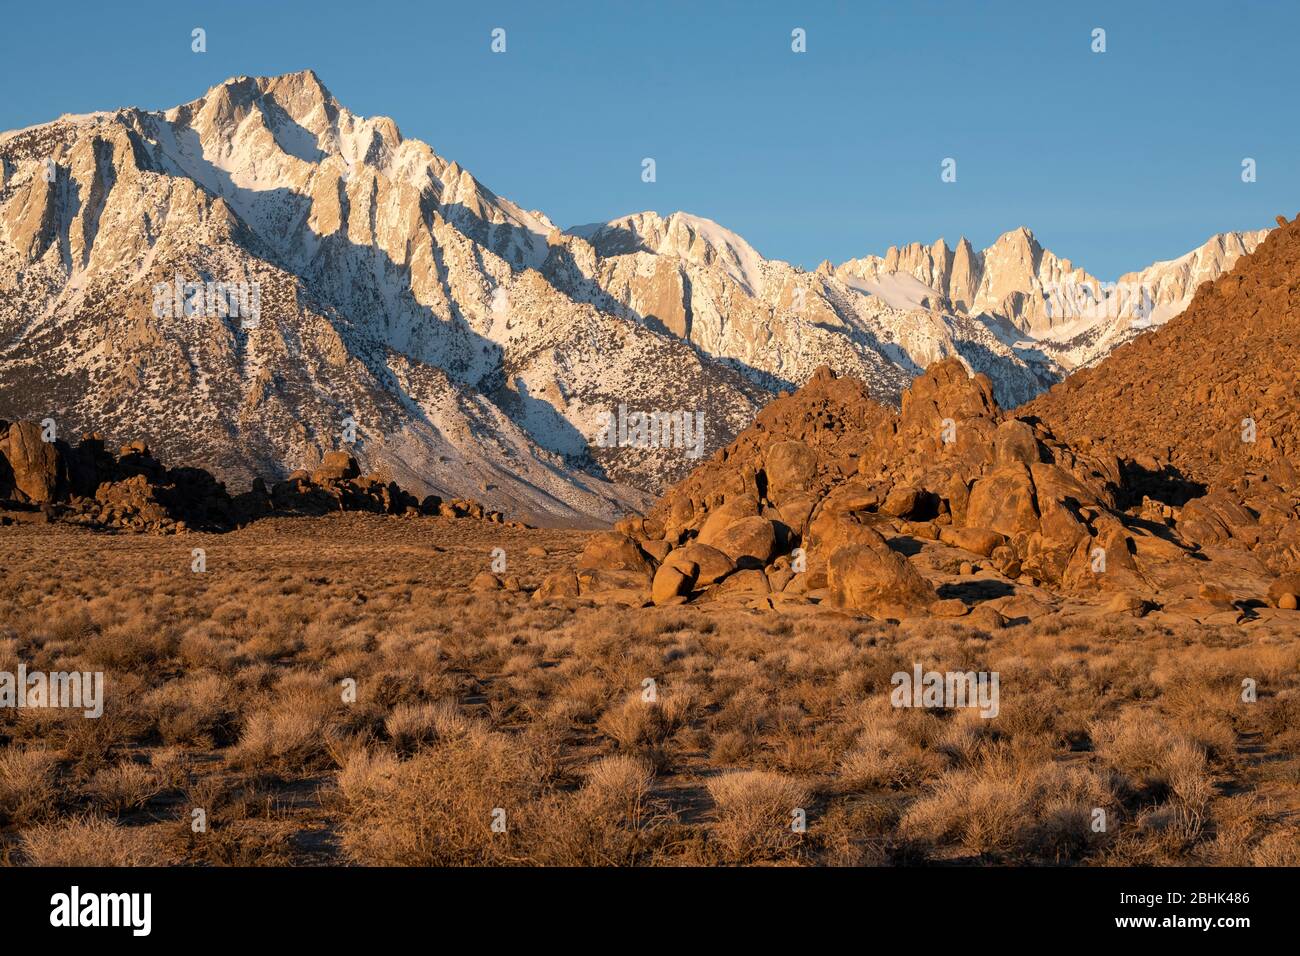 View of Mt. Whitney at dawn from the Alabama Hills in Inyo County, California Stock Photo